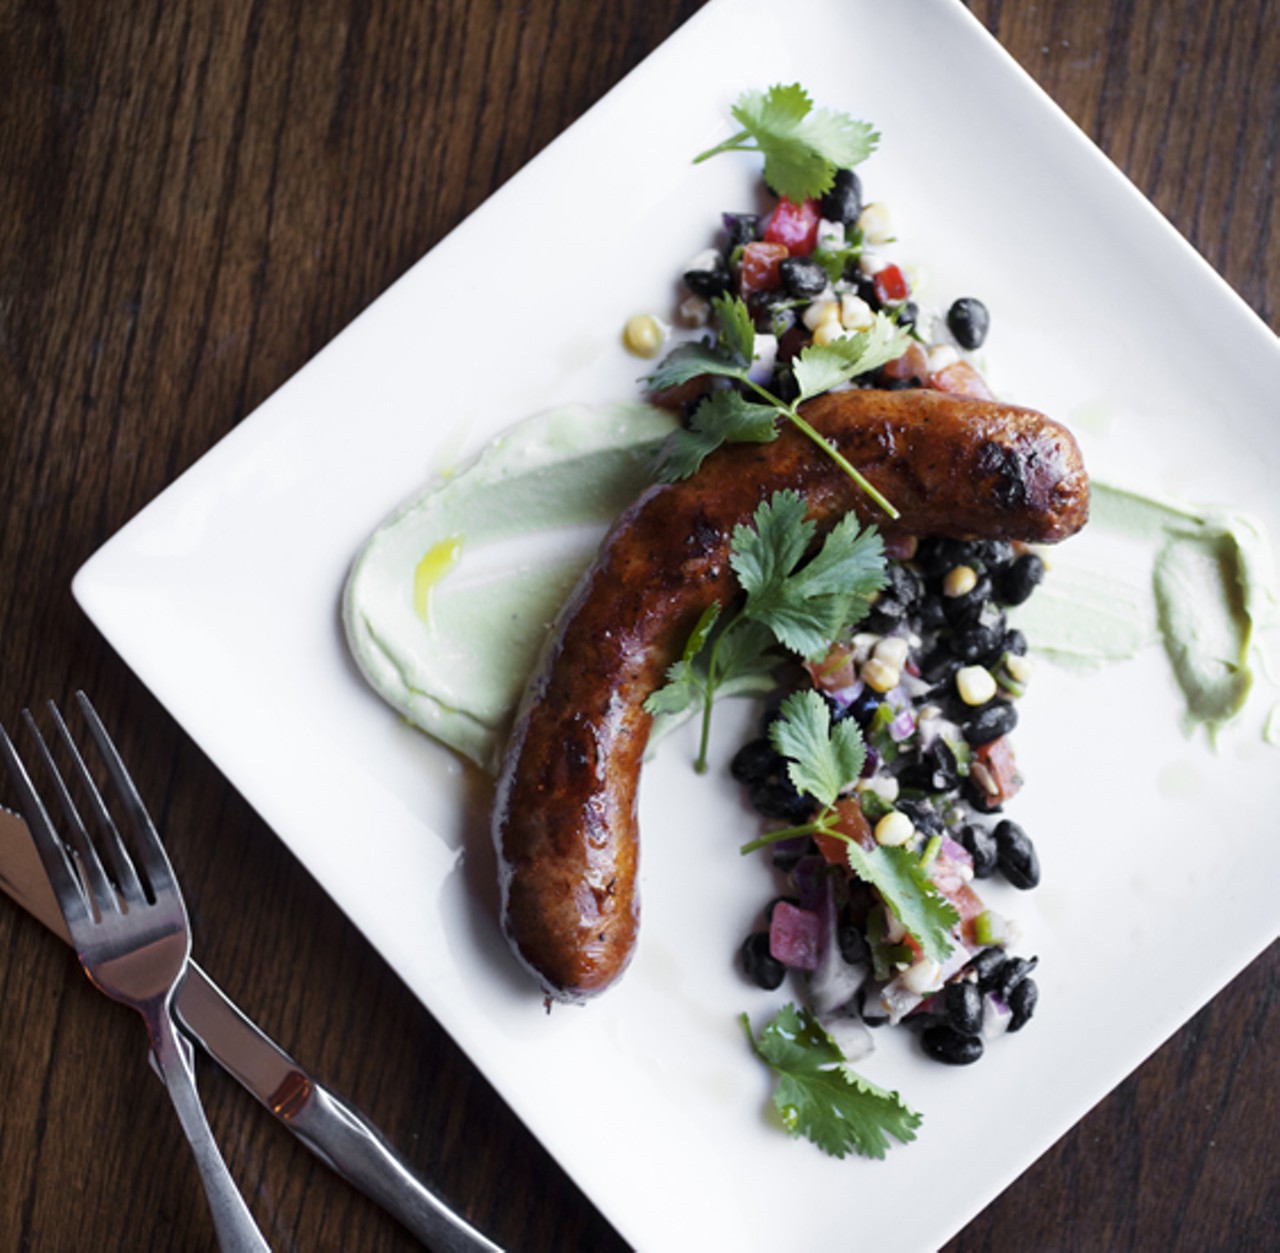 House Sausage Plate last week was Mexican chorizo with avocado cream and a black bean and corn salsa.